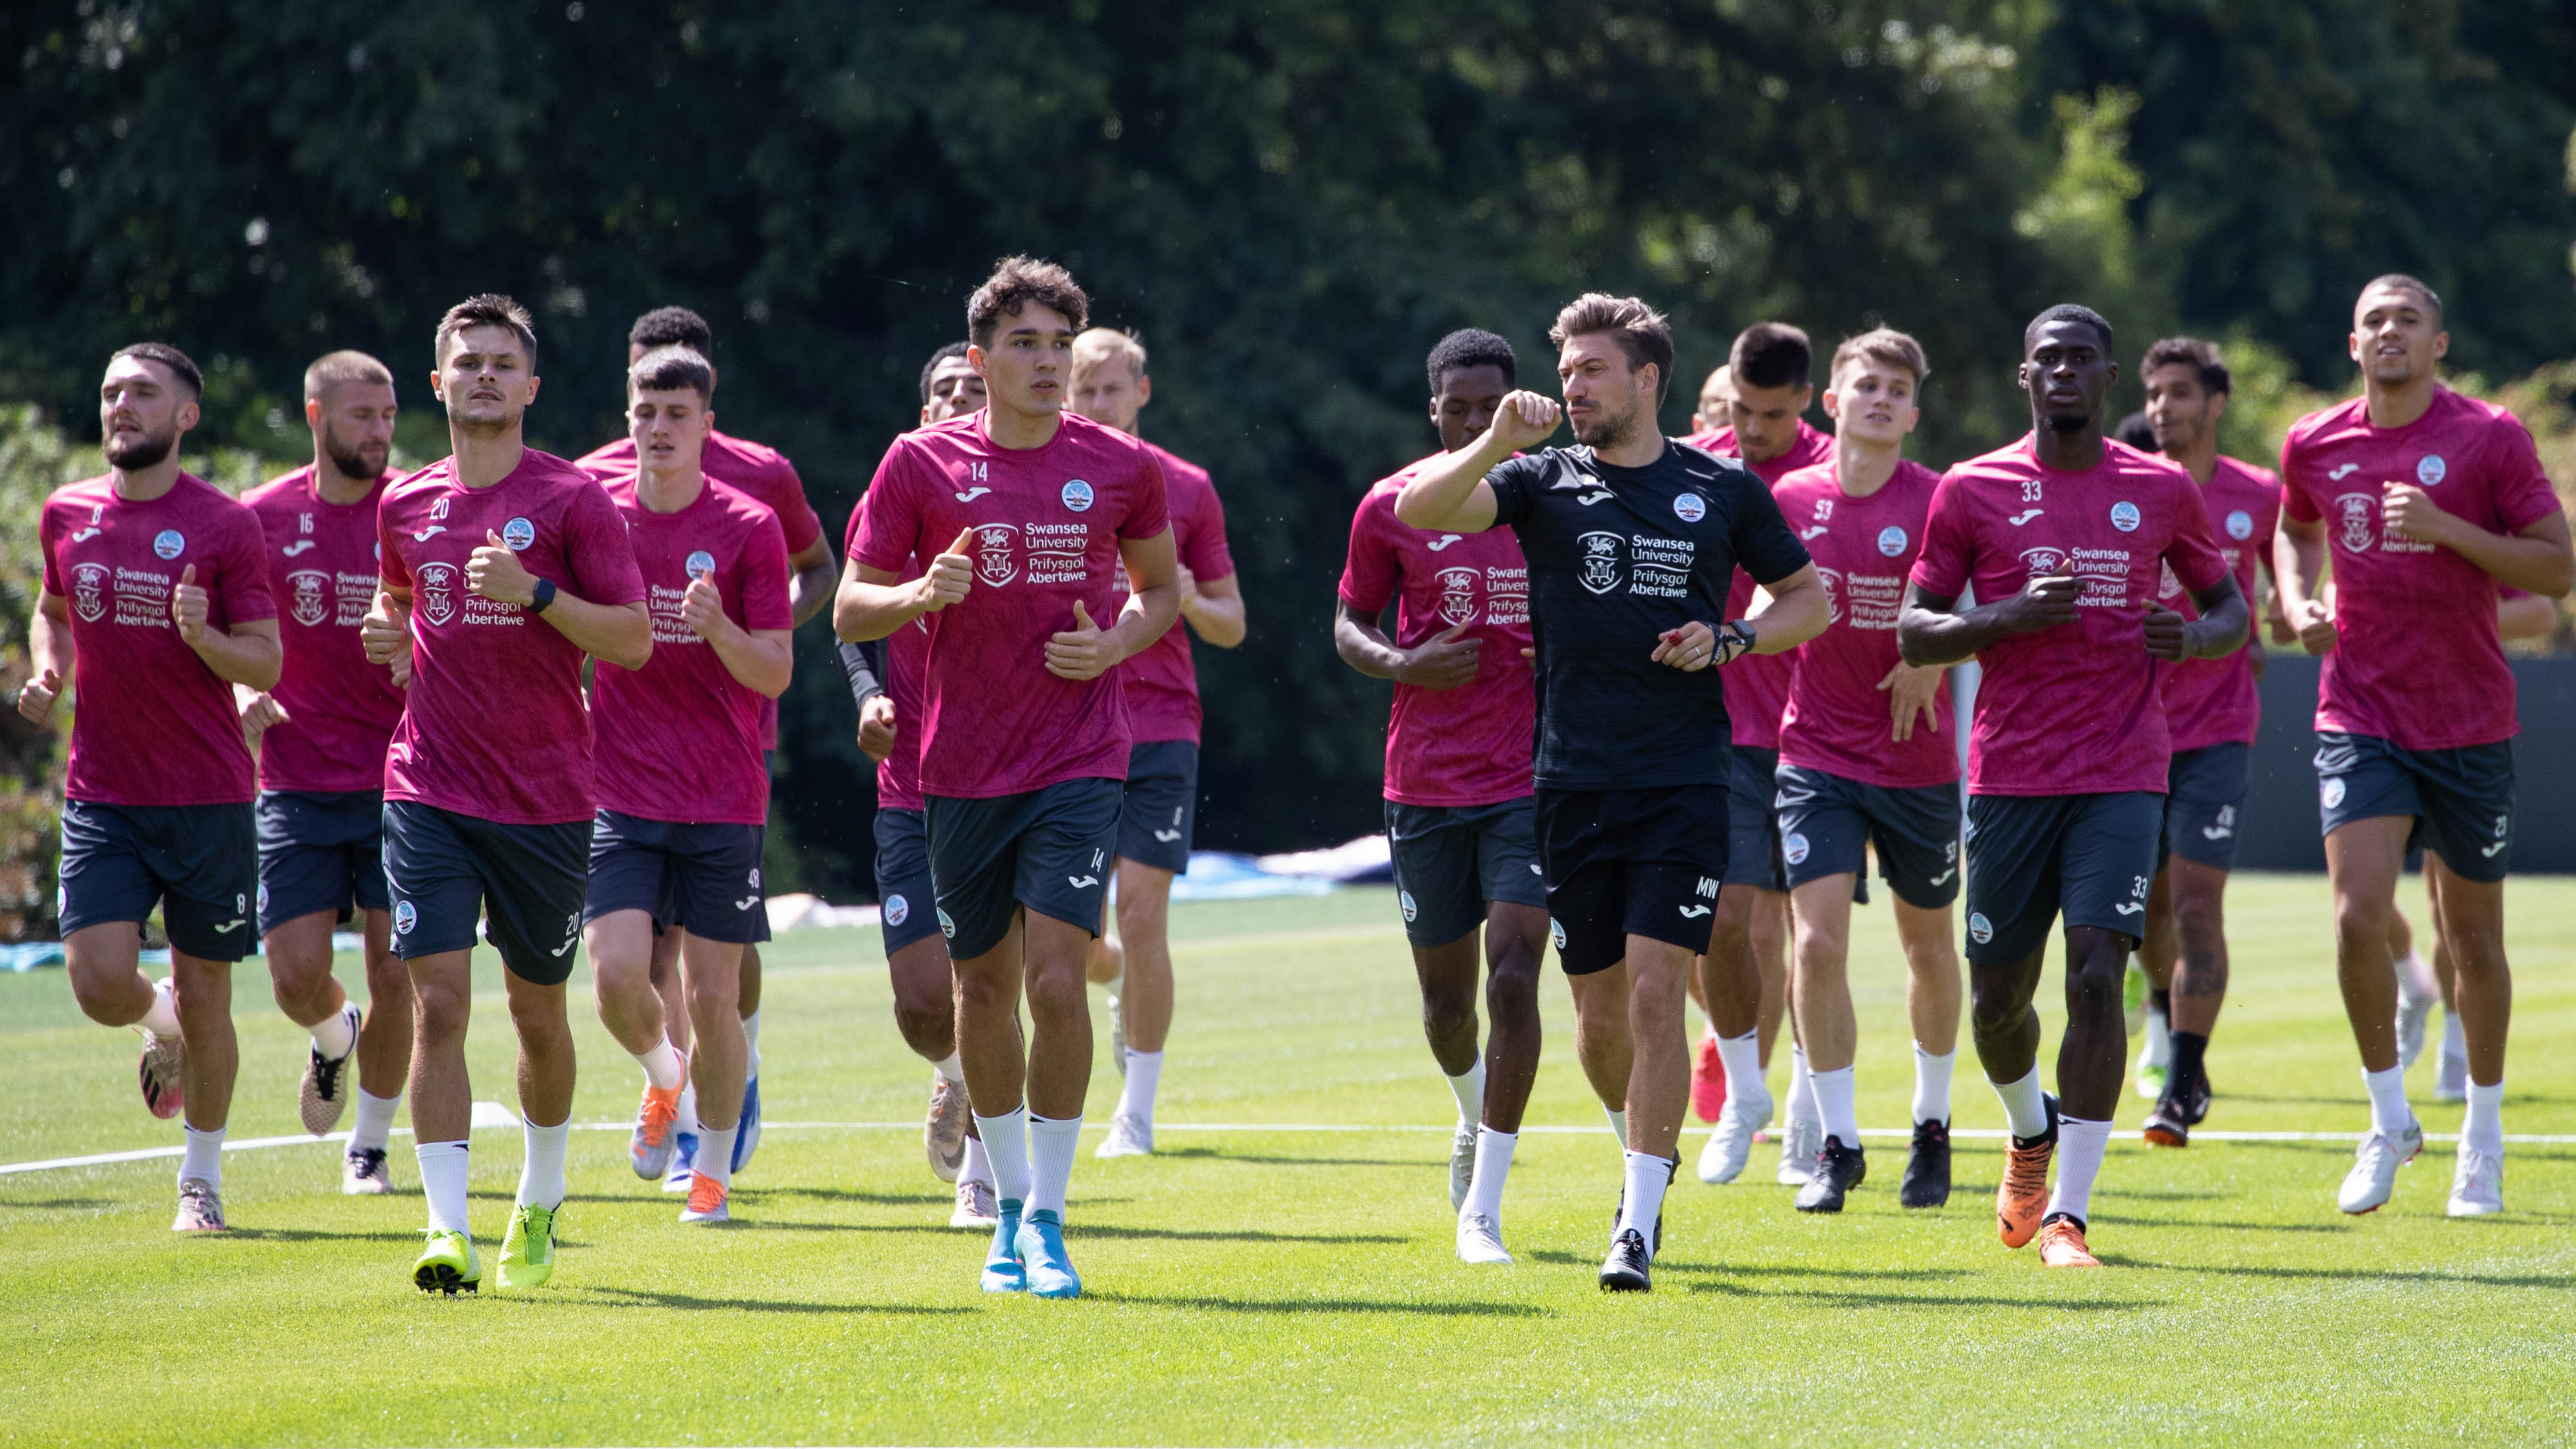 A group of Swansea City players wearing their training kit are jogging as a group